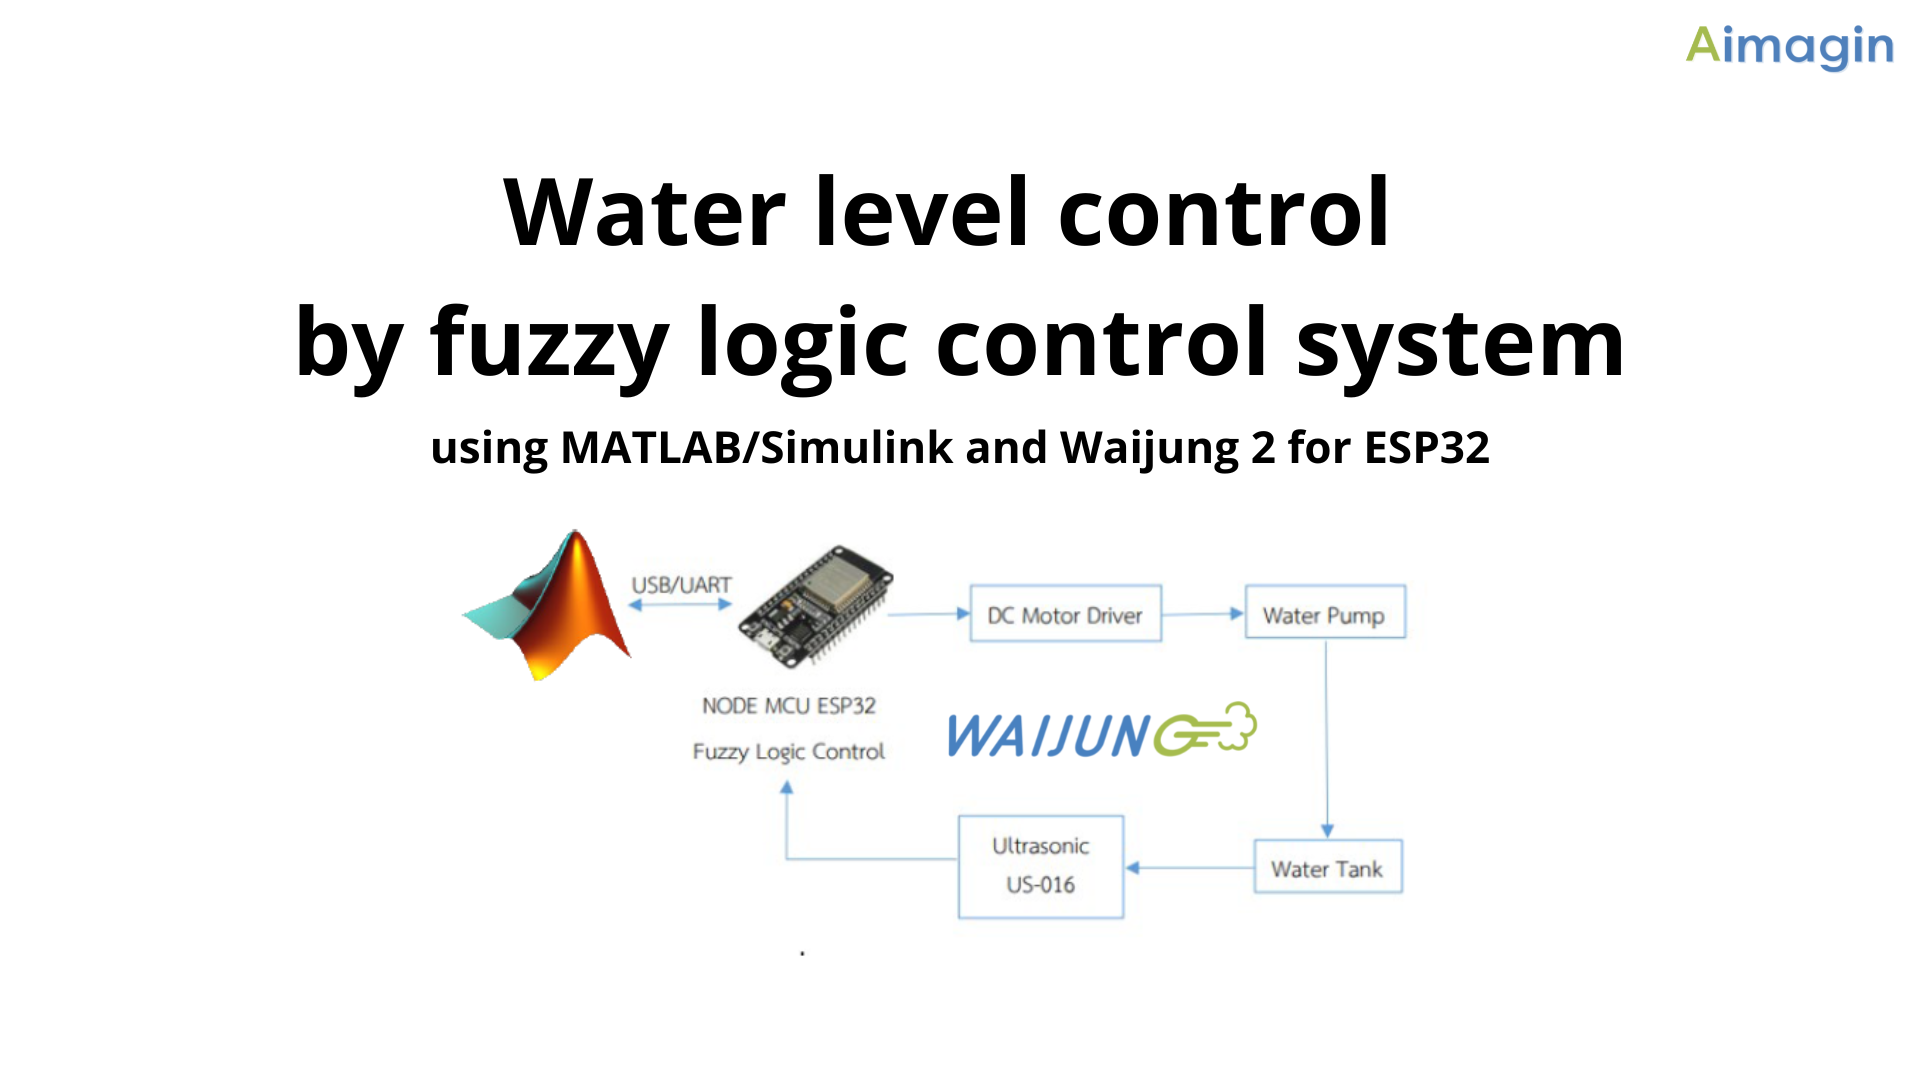 Water level control by fuzzy logic control system